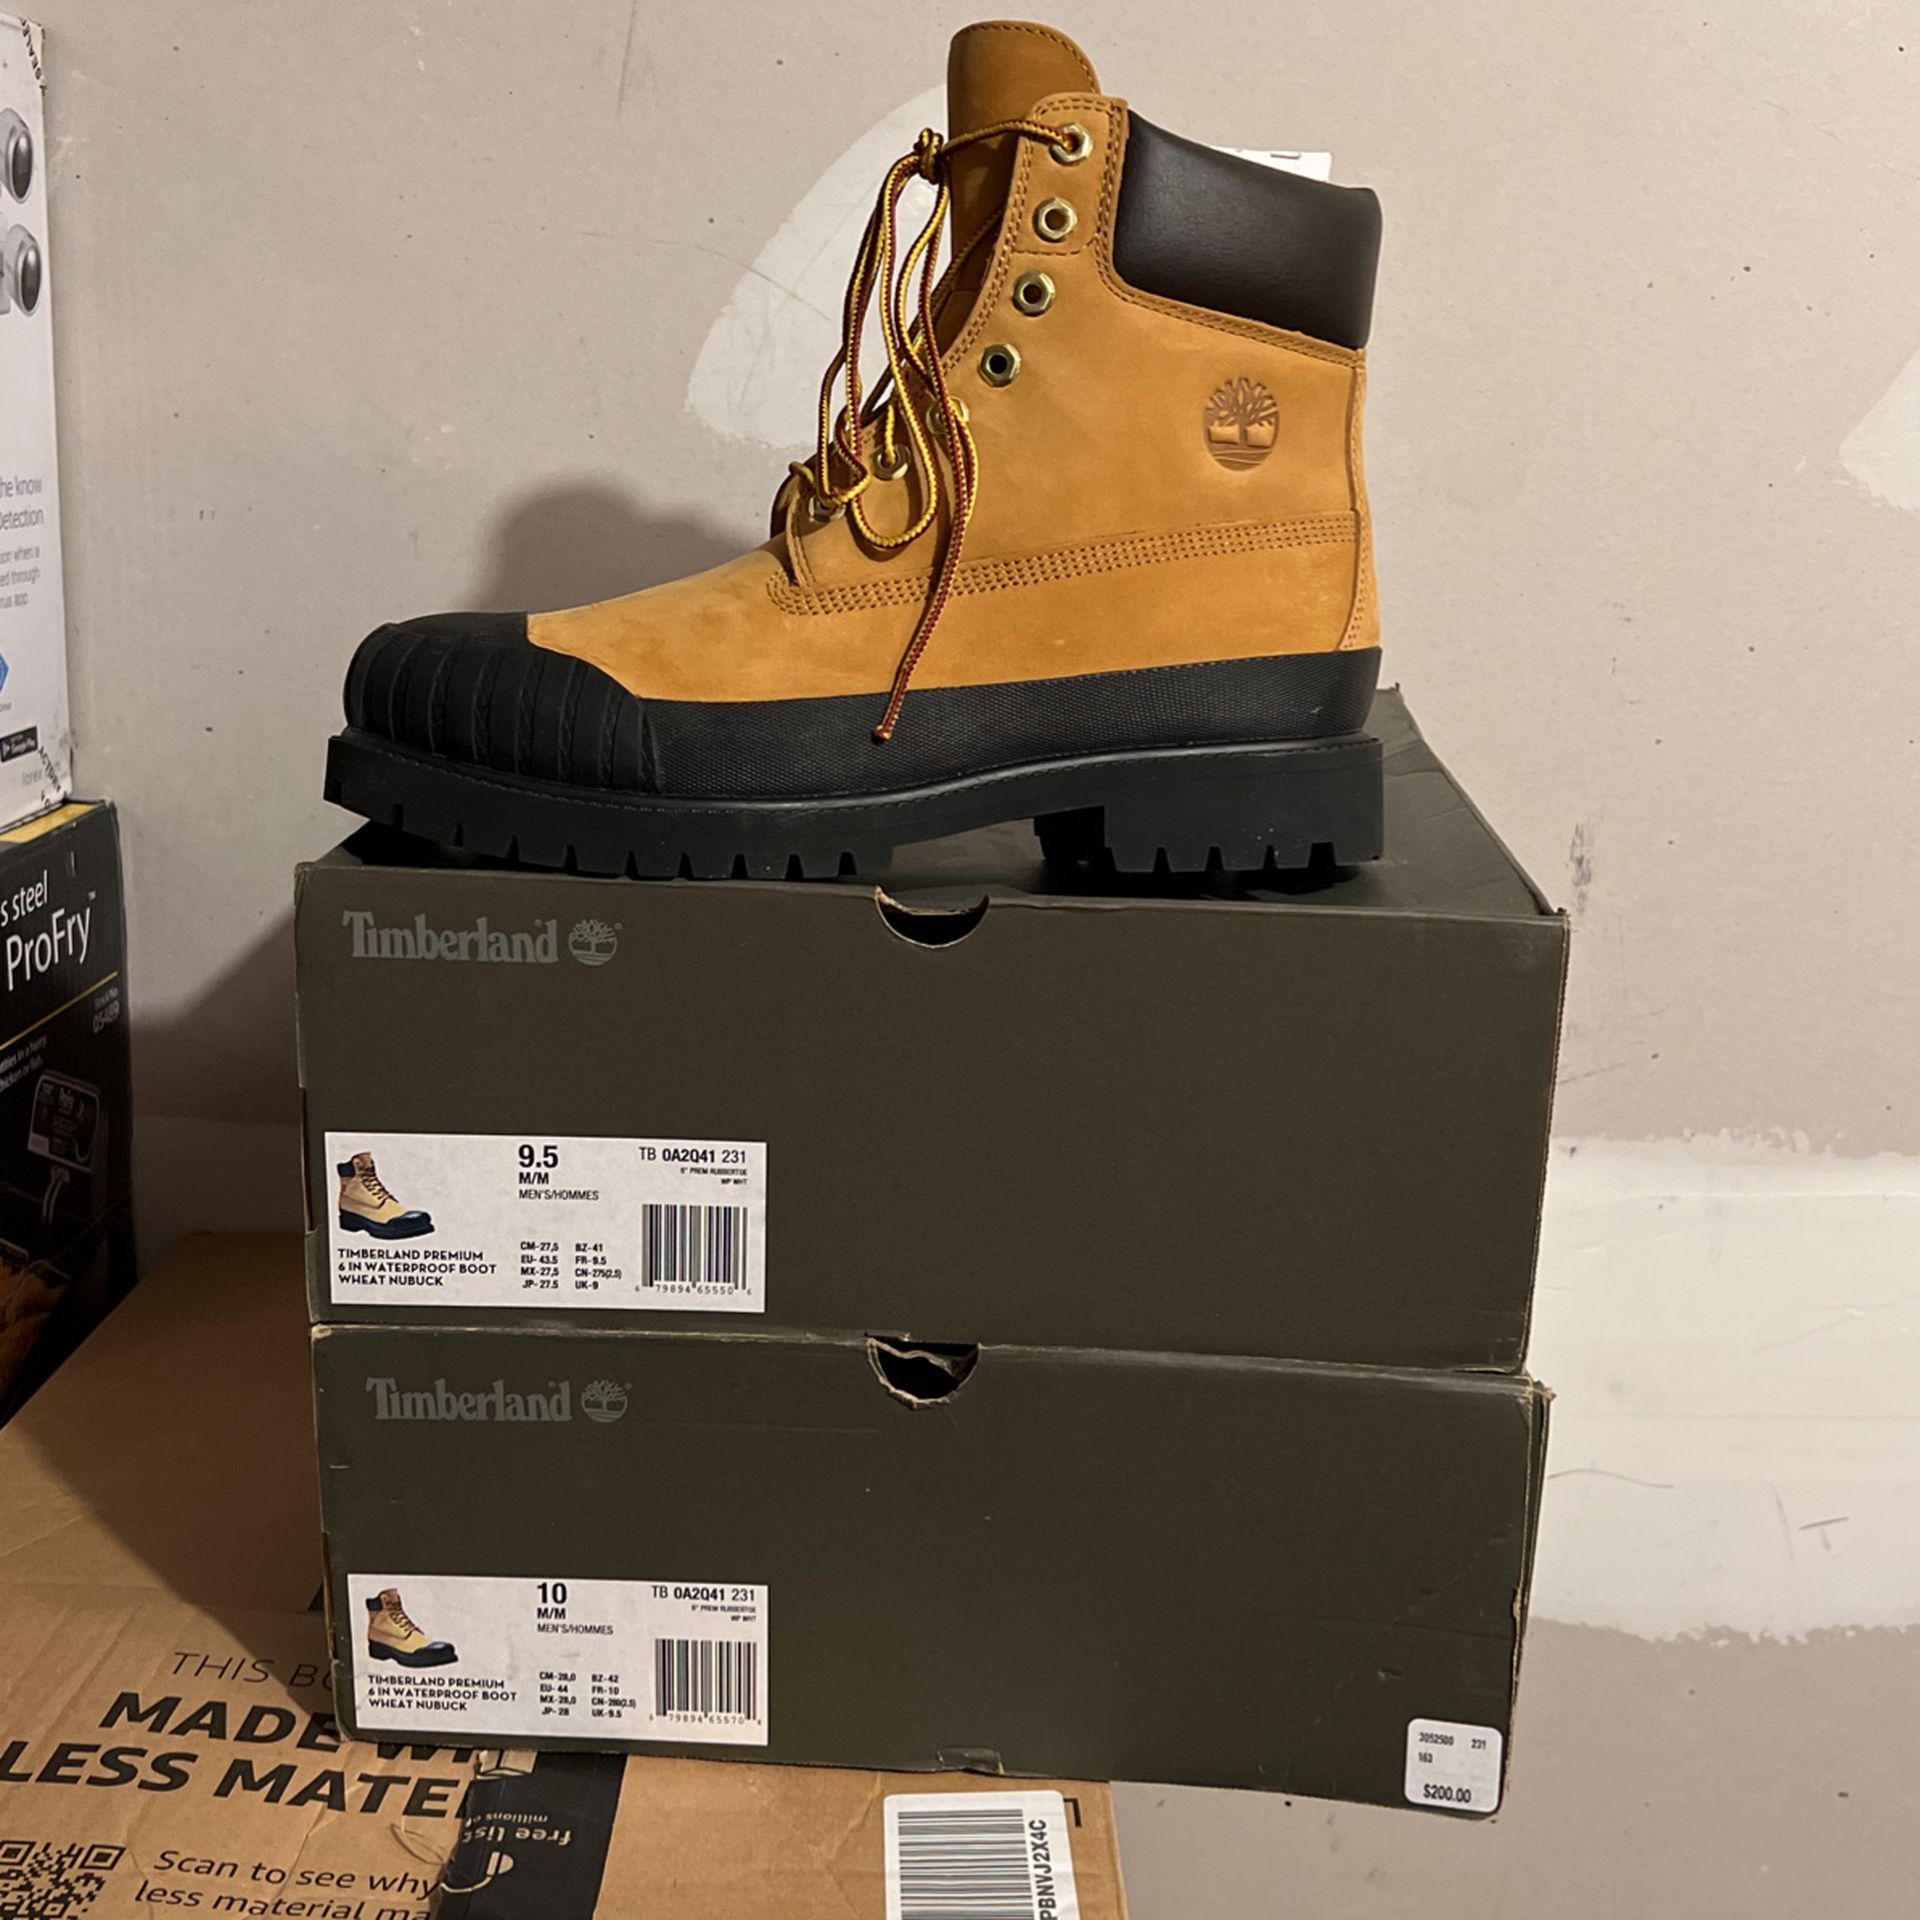 6” Timberland Rubber Toe **IF ITS POSTED, IT’S AVAILABLE **